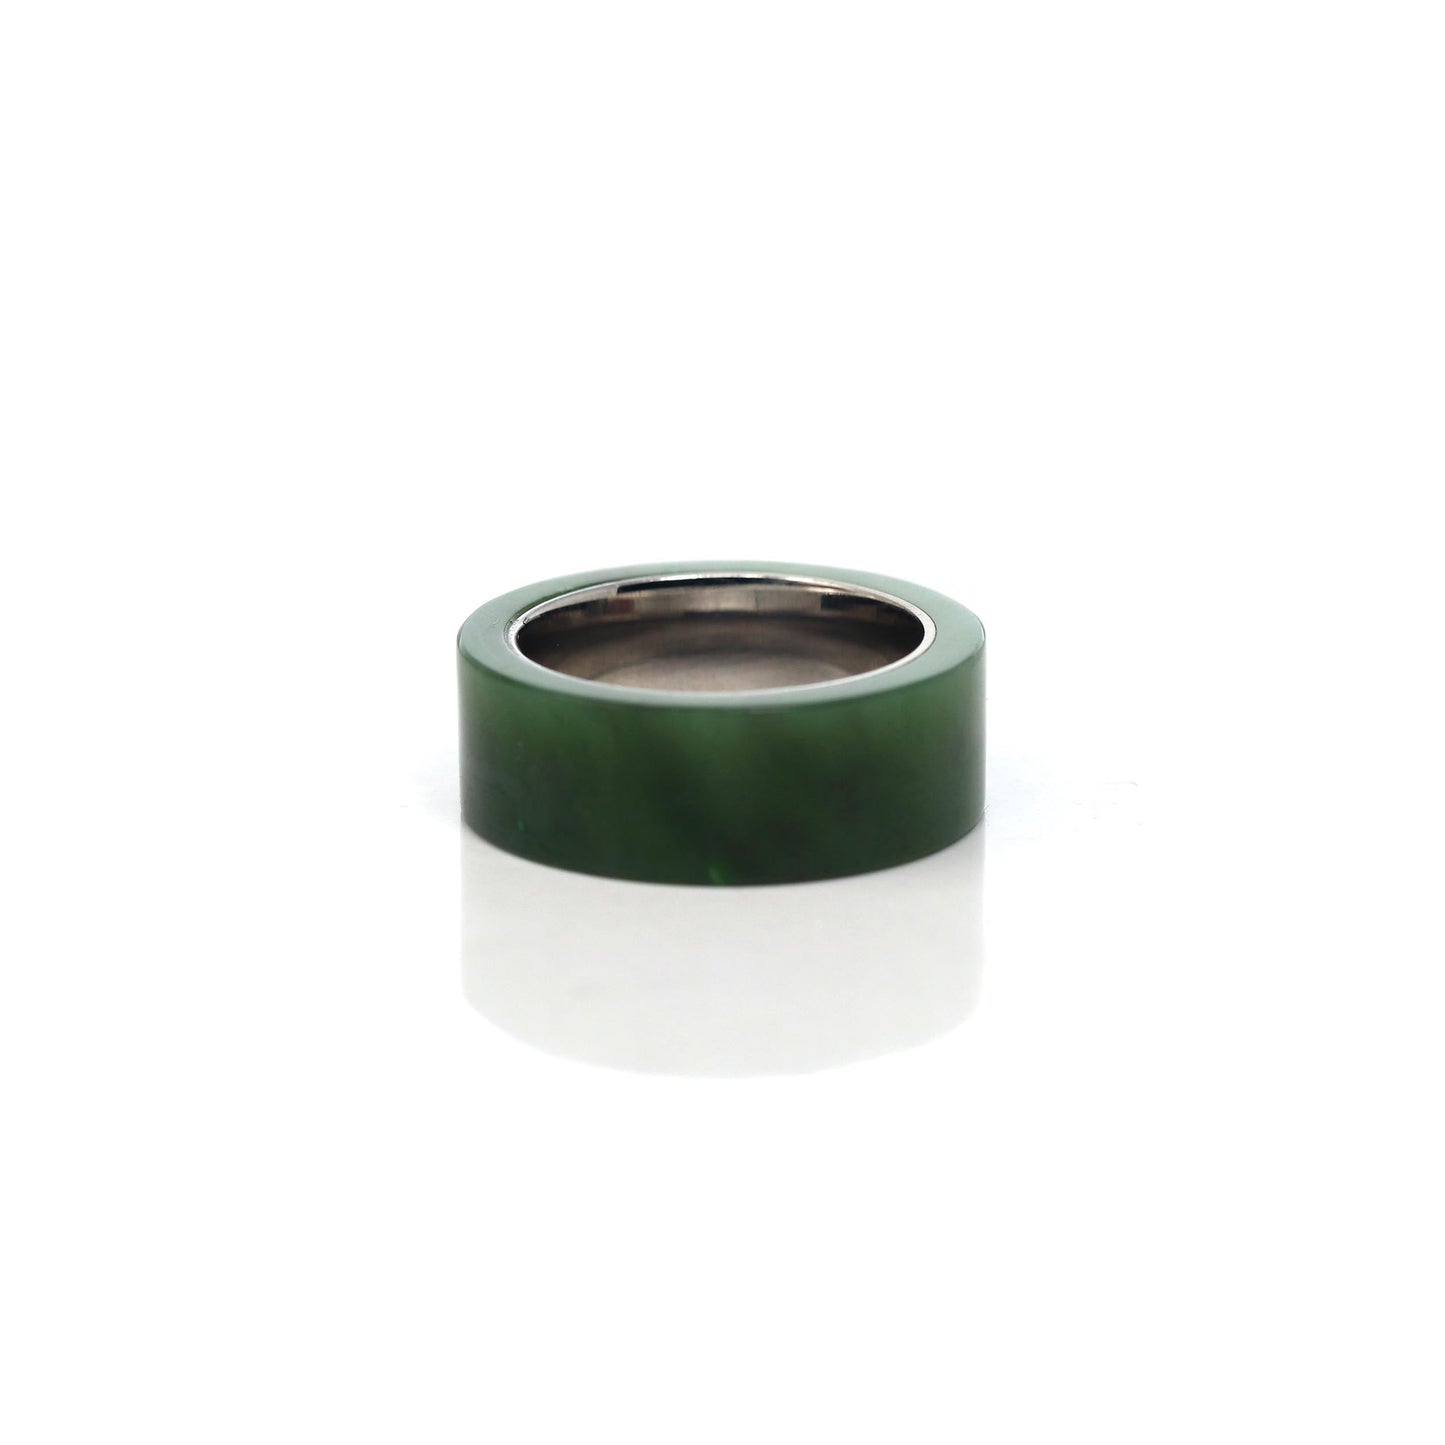 RealJade® Co. RealJade® Co. "Signature Signet" Stainless Steel Real Green Nephrite Jade Classic Men's Band